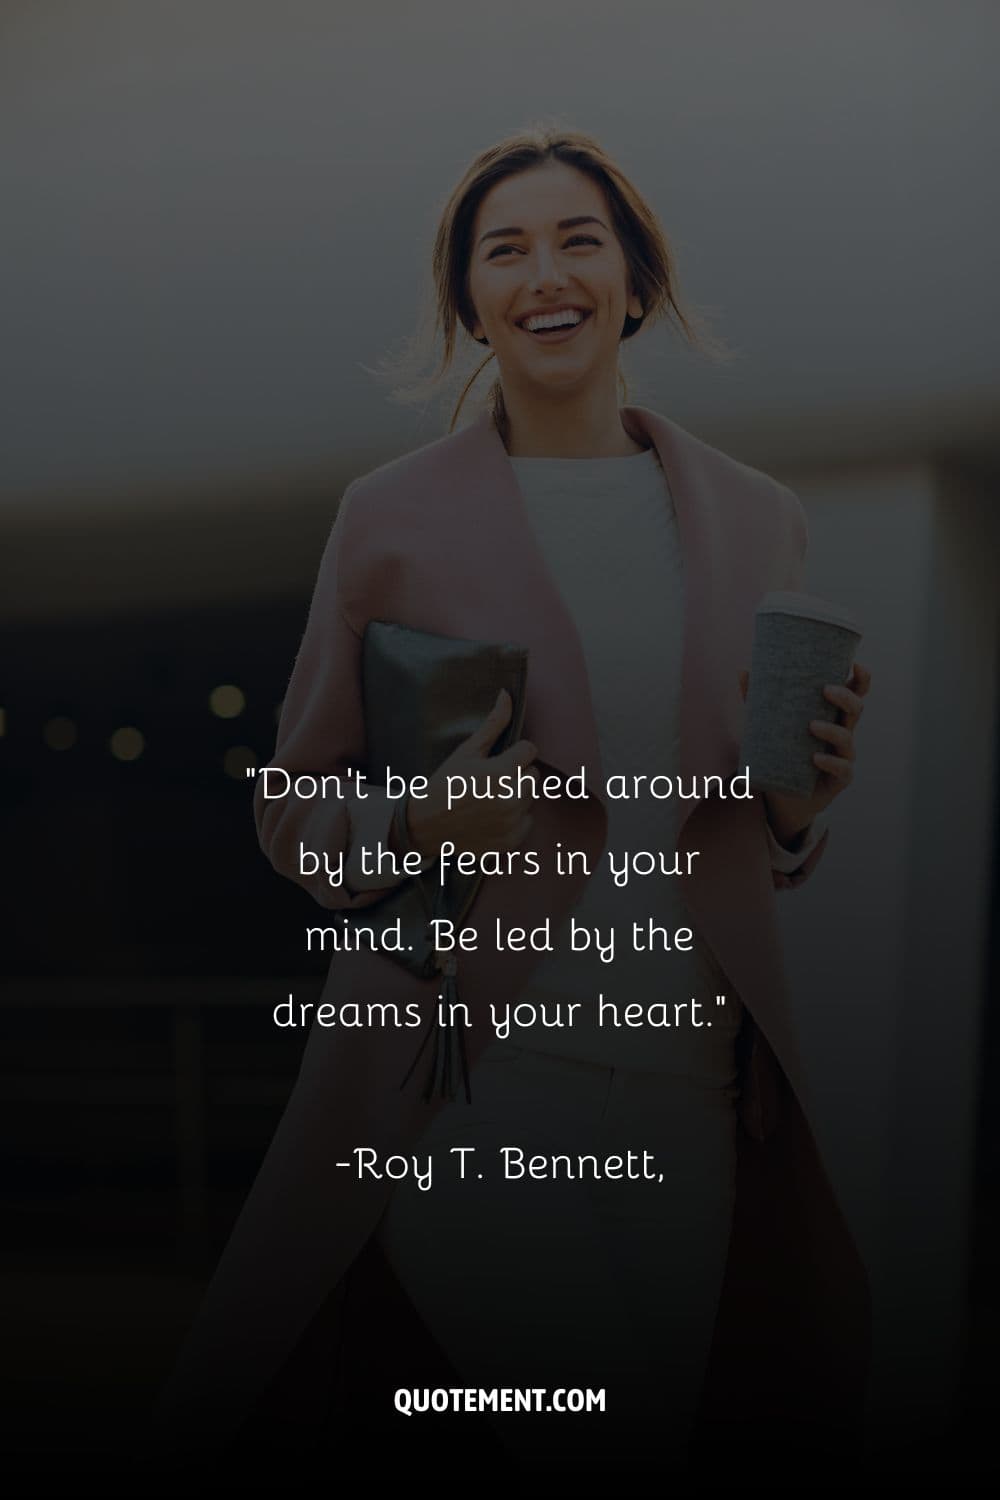 Don't be pushed around by the fears in your mind. Be led by the dreams in your heart